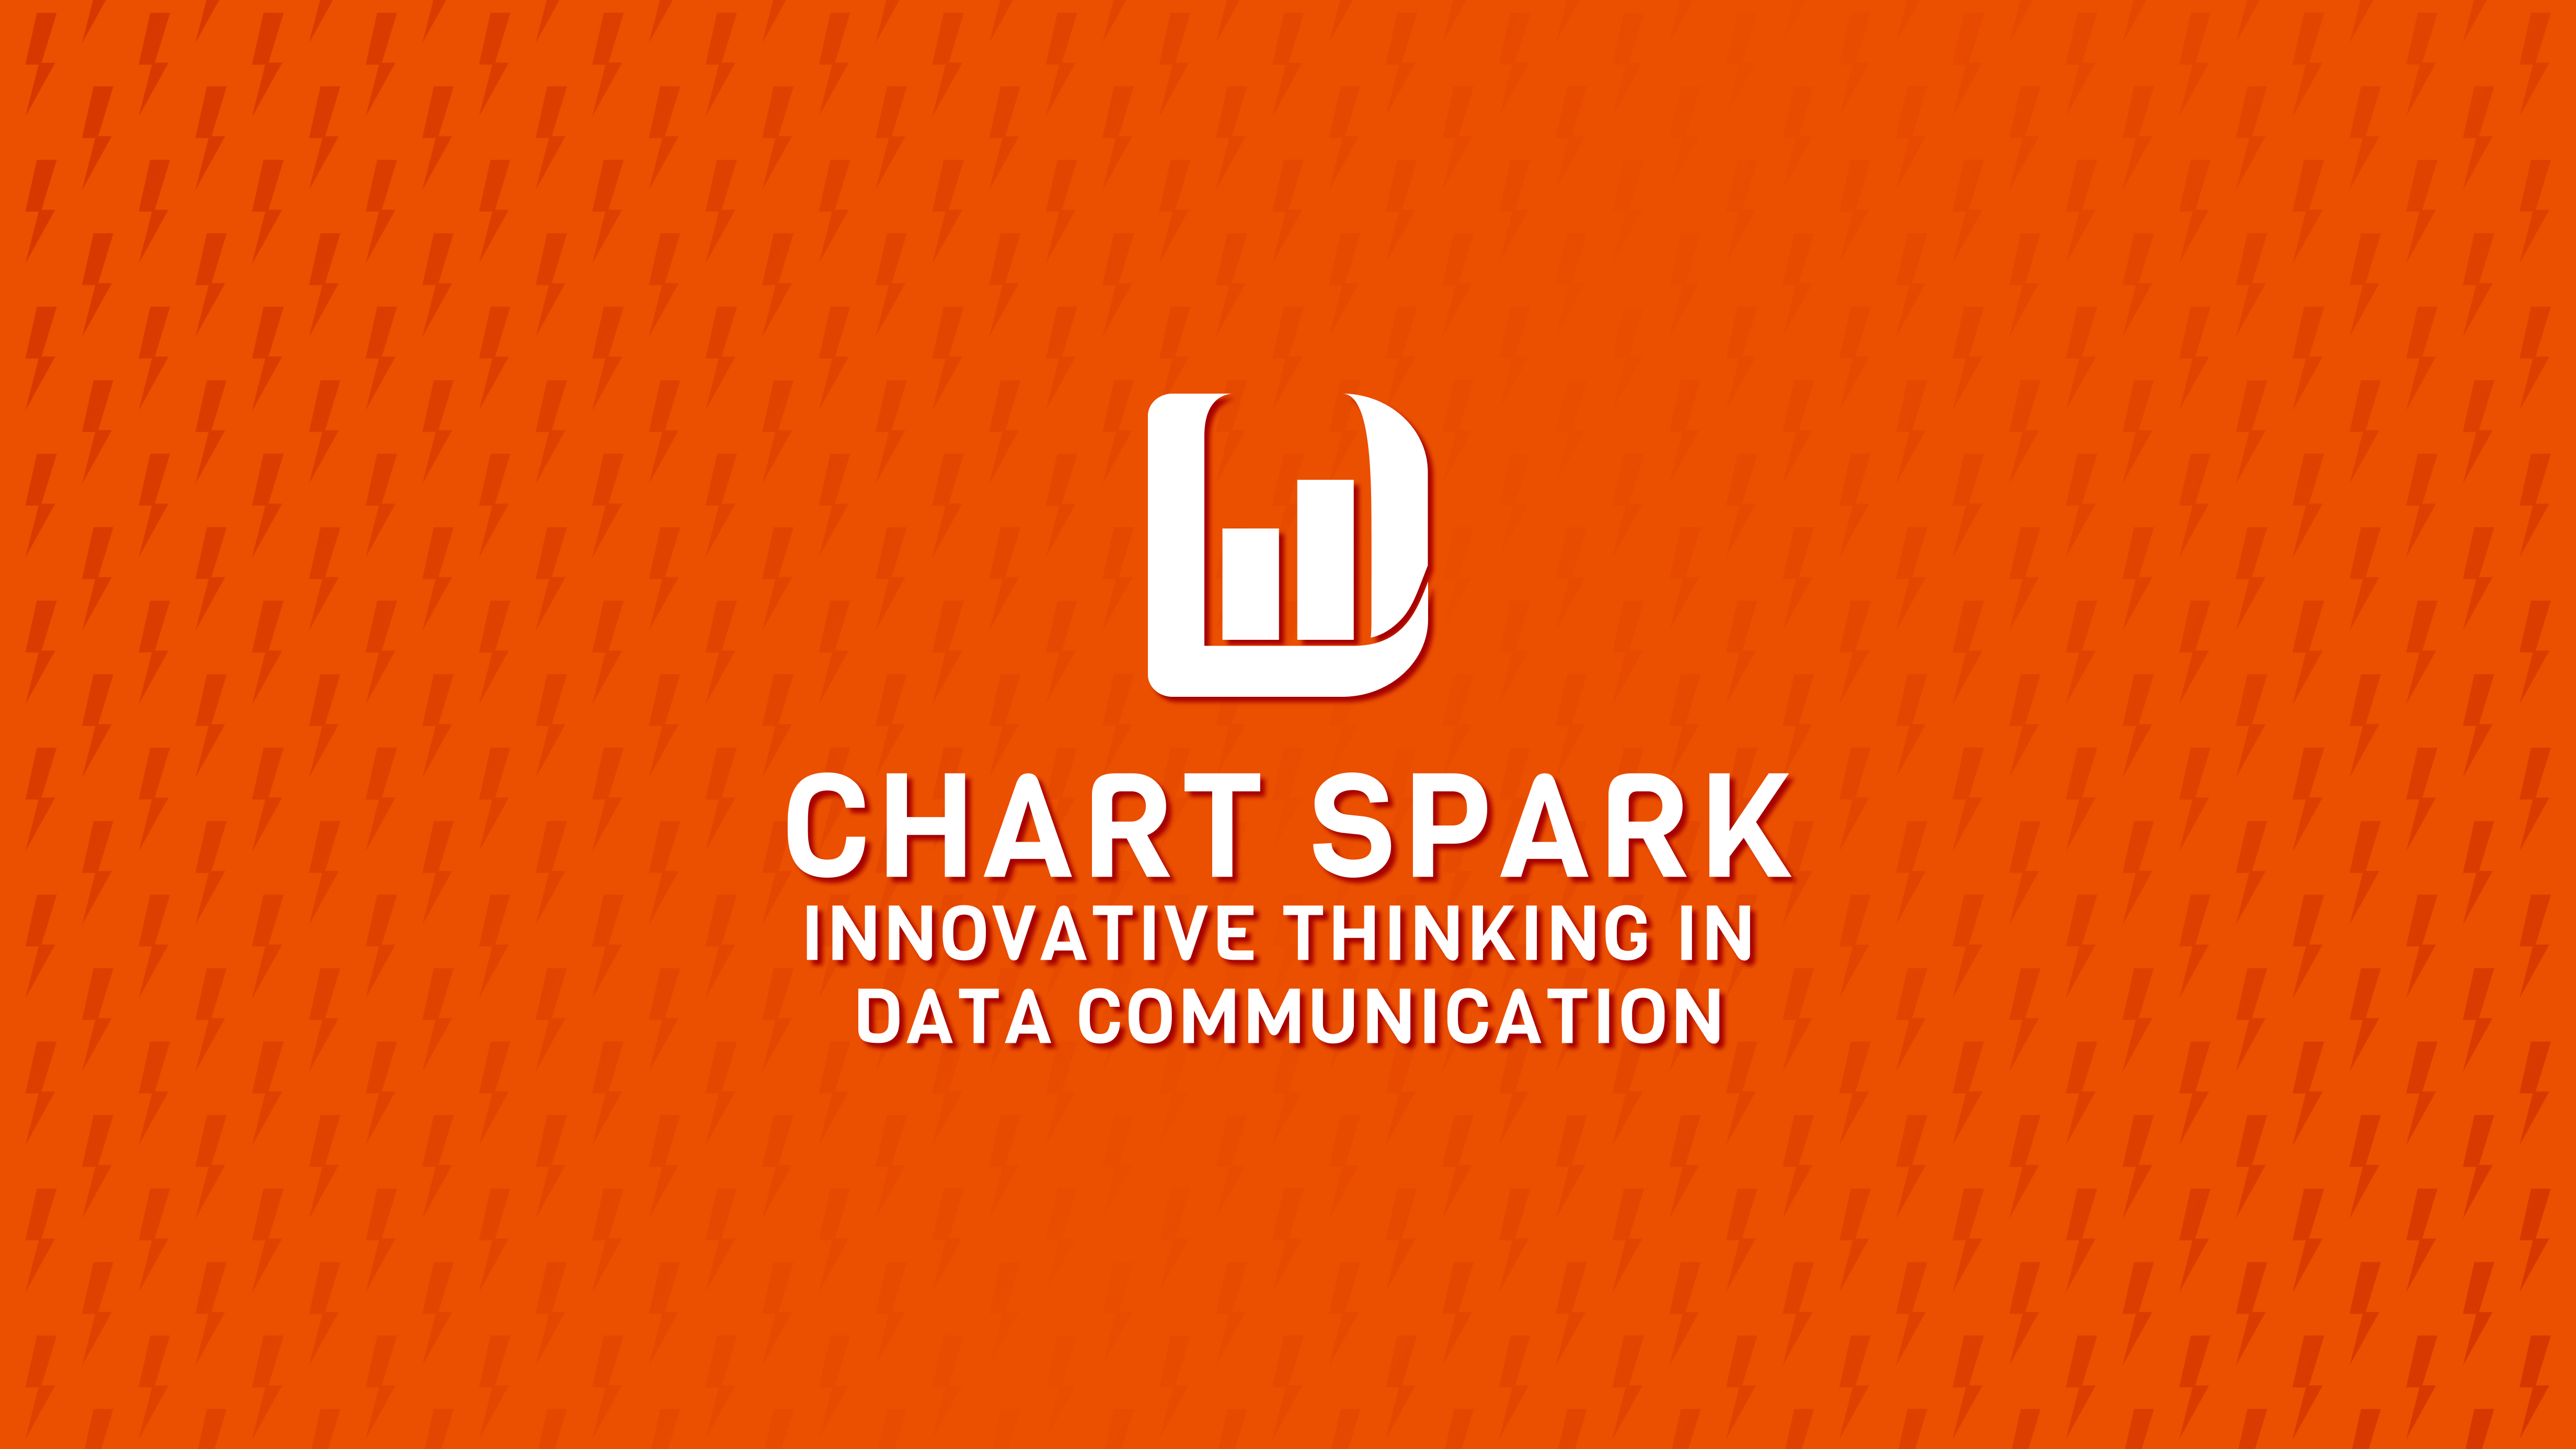 snazzy image for chart spark course with orange background with lightning bolt pattern.